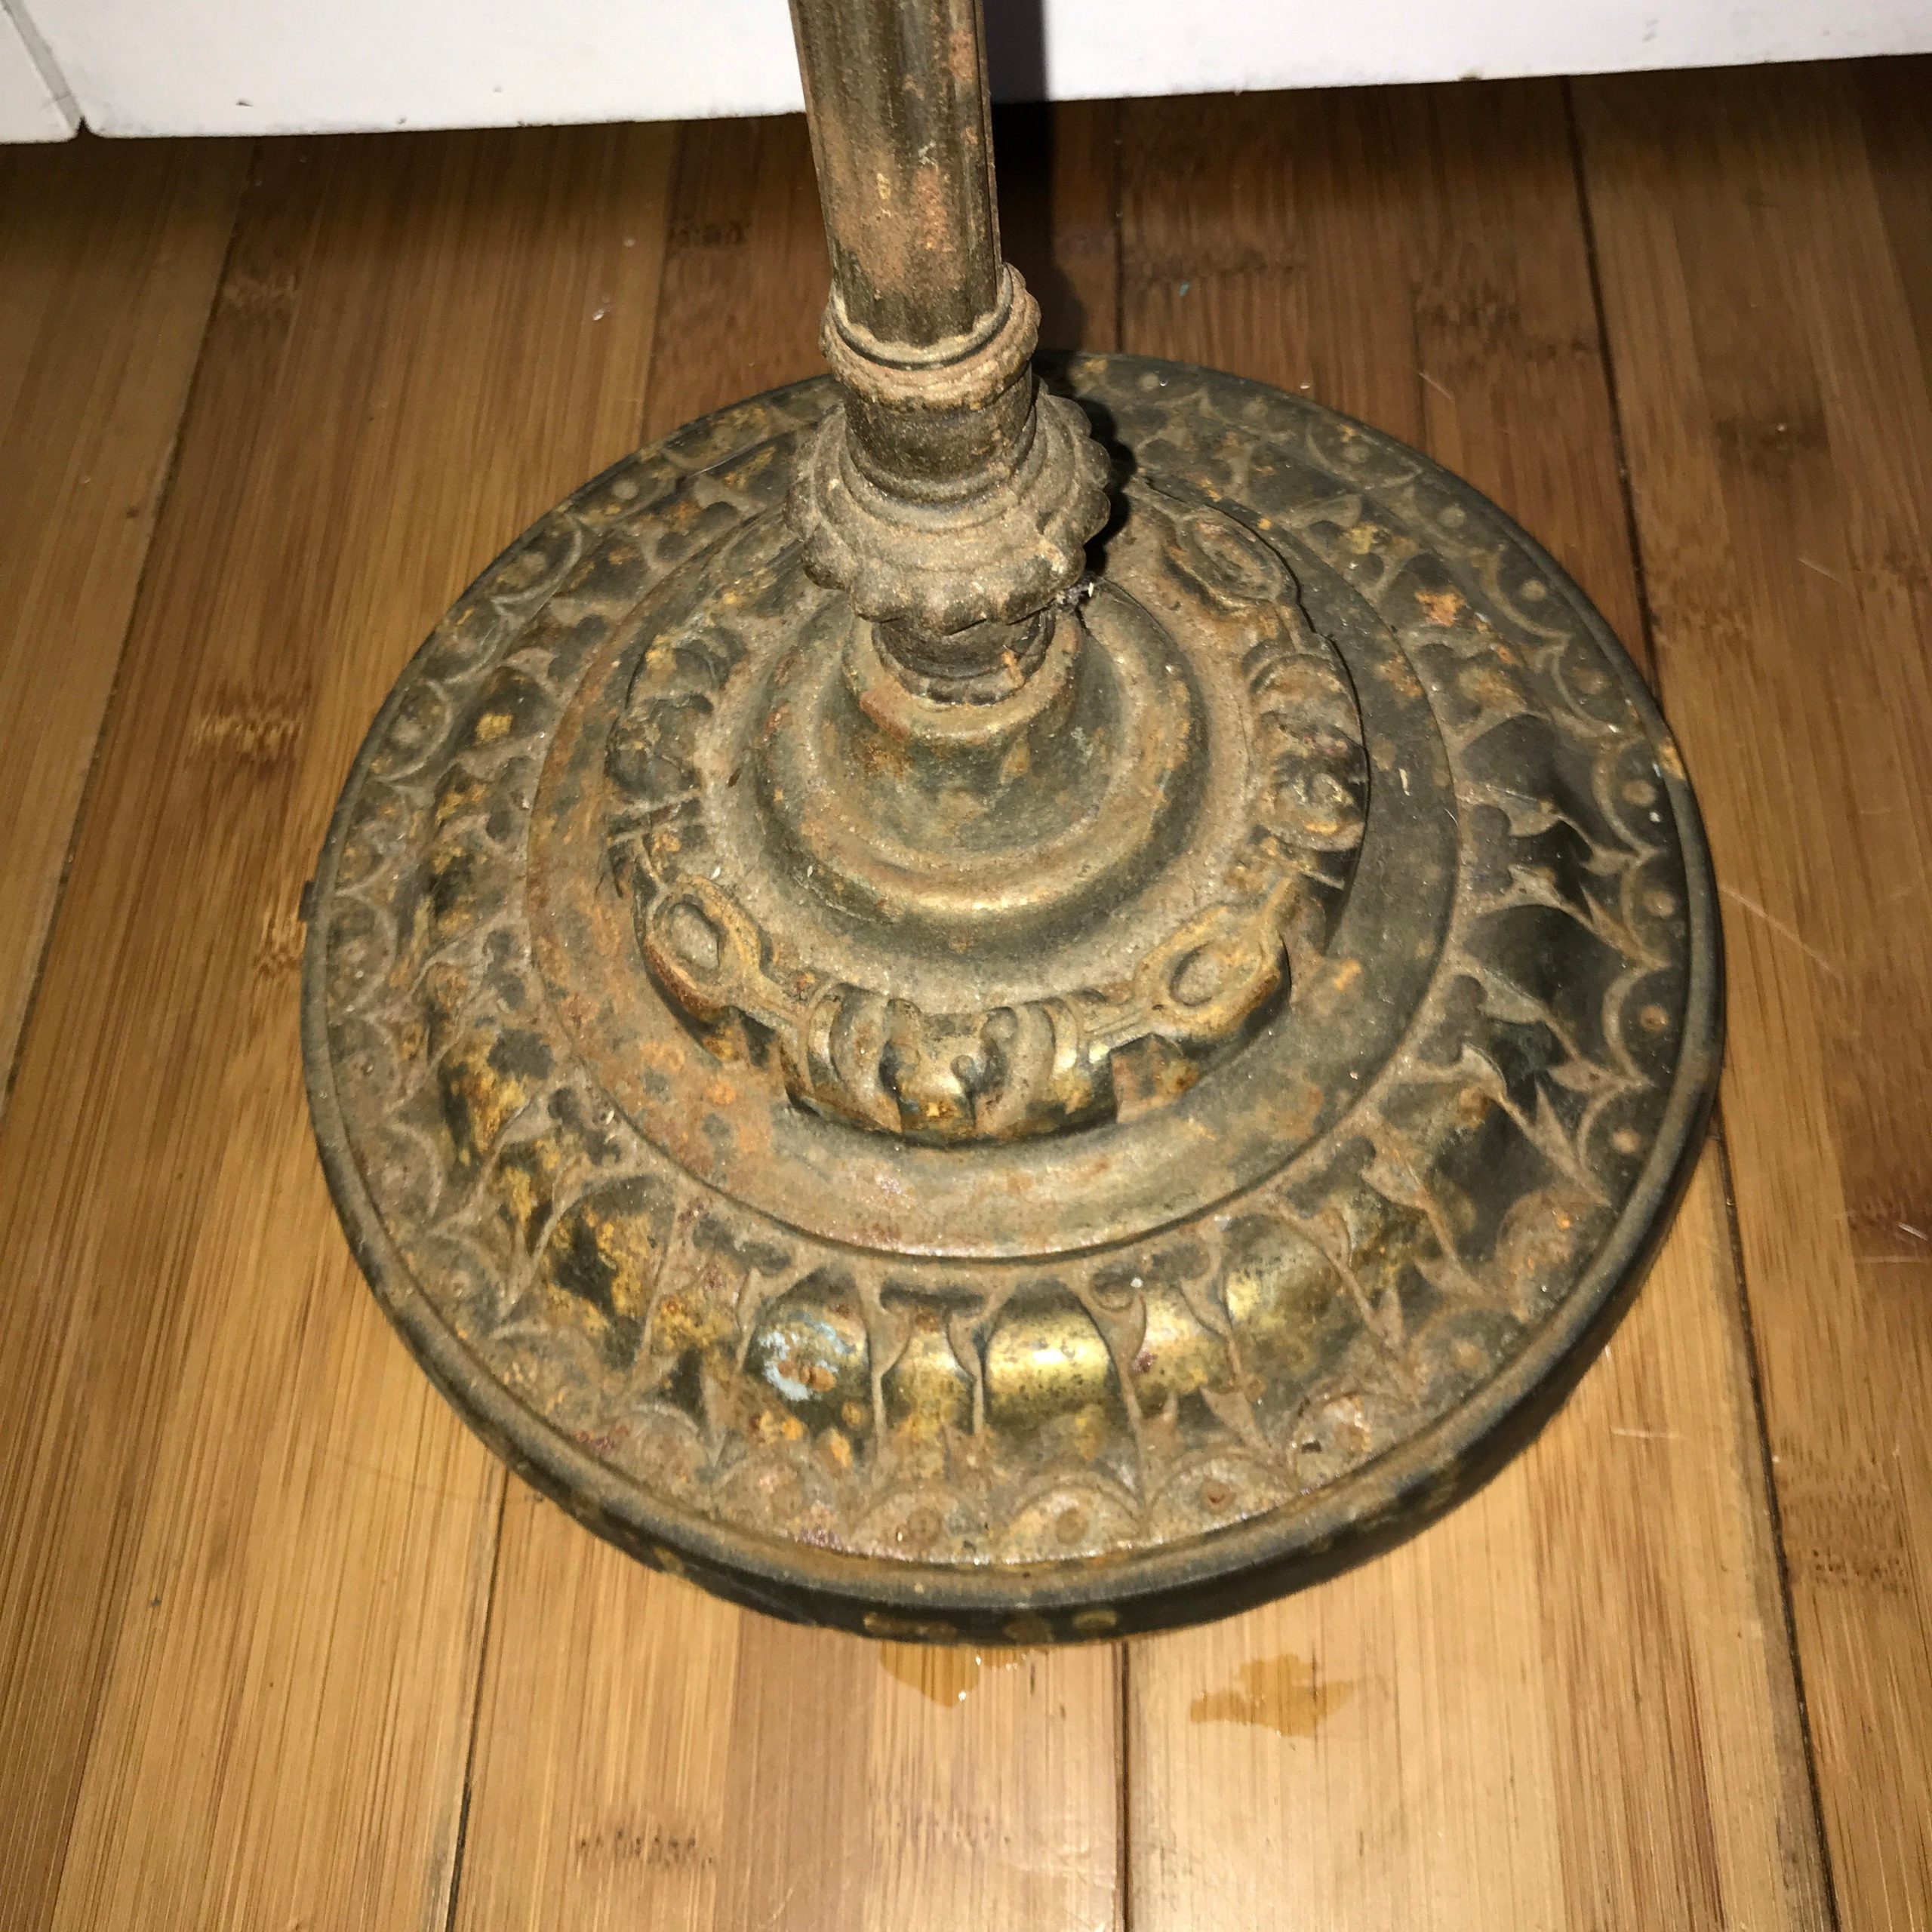 Vintage bridge or floor lamp ornate cast iron base with pole and